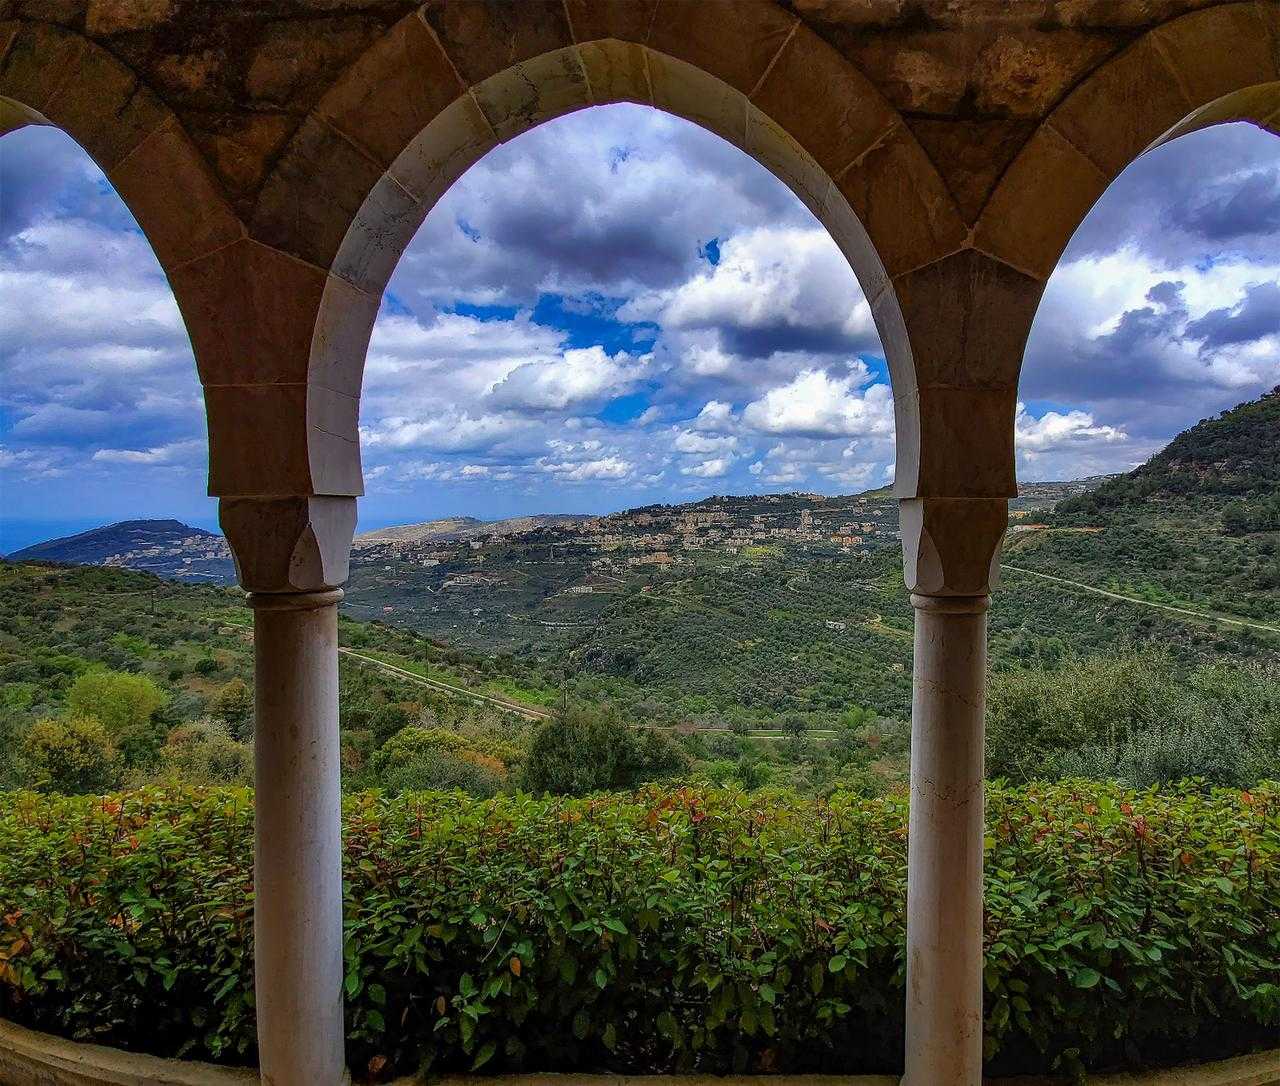 A view of the Chouf Biosphere Reserve from the Beiteddine Palace.  The Chouf, the largest reserve in Lebanon, was designated a UNESCO Biosphere in 2005. The area is home to a quarter of Lebanon’s cedar forests, with some trees estimated to be 2,000 years old. The Beiteddine (“House of Faith”) Palace resides within the Chouf Biosphere.  A symbol of Ottoman-appointed governor Emir Bashir’s power and the glory of his reign, construction began on the palace in 1788 and took 30 years to complete. The palace has one of the most spectacular Byzantine mosaic collections in the eastern Mediterranean, many excavated from the ancient city of Porphyrion.